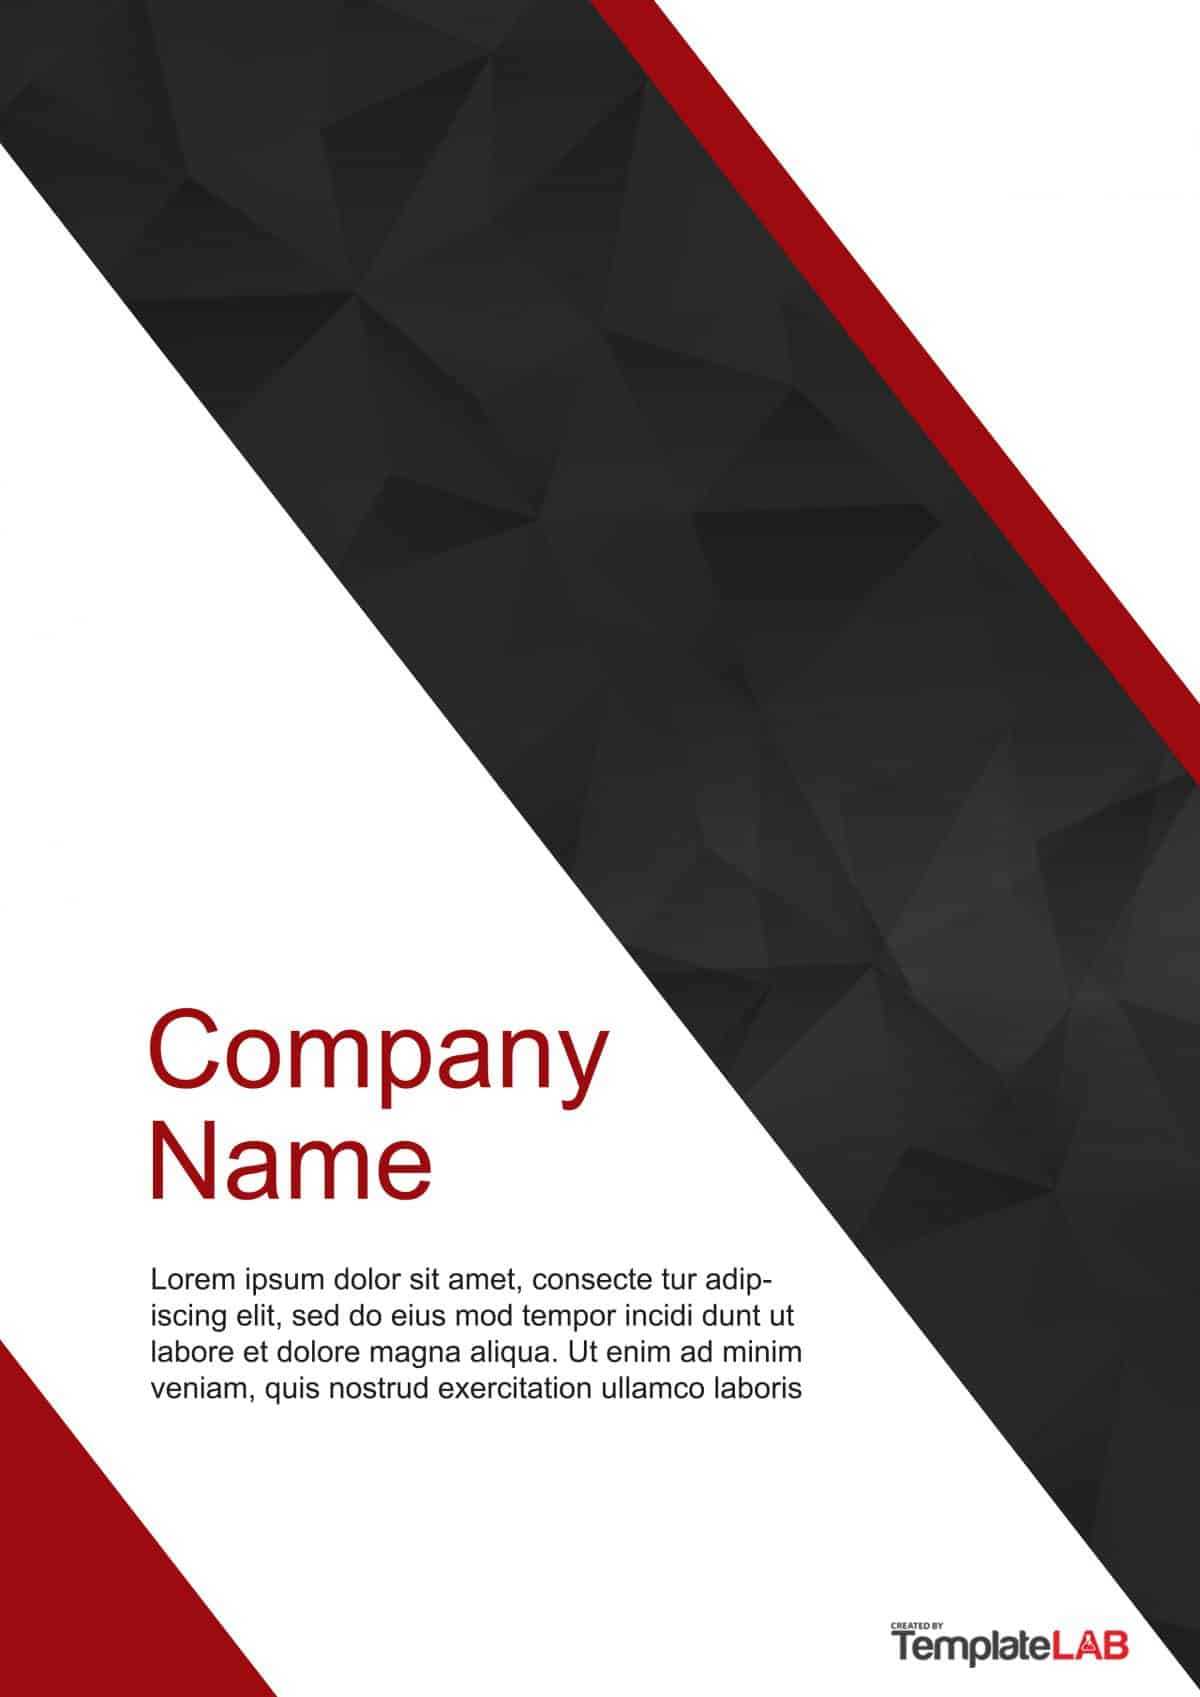 39 Amazing Cover Page Templates (Word + Psd) ᐅ Templatelab Pertaining To Word Title Page Templates